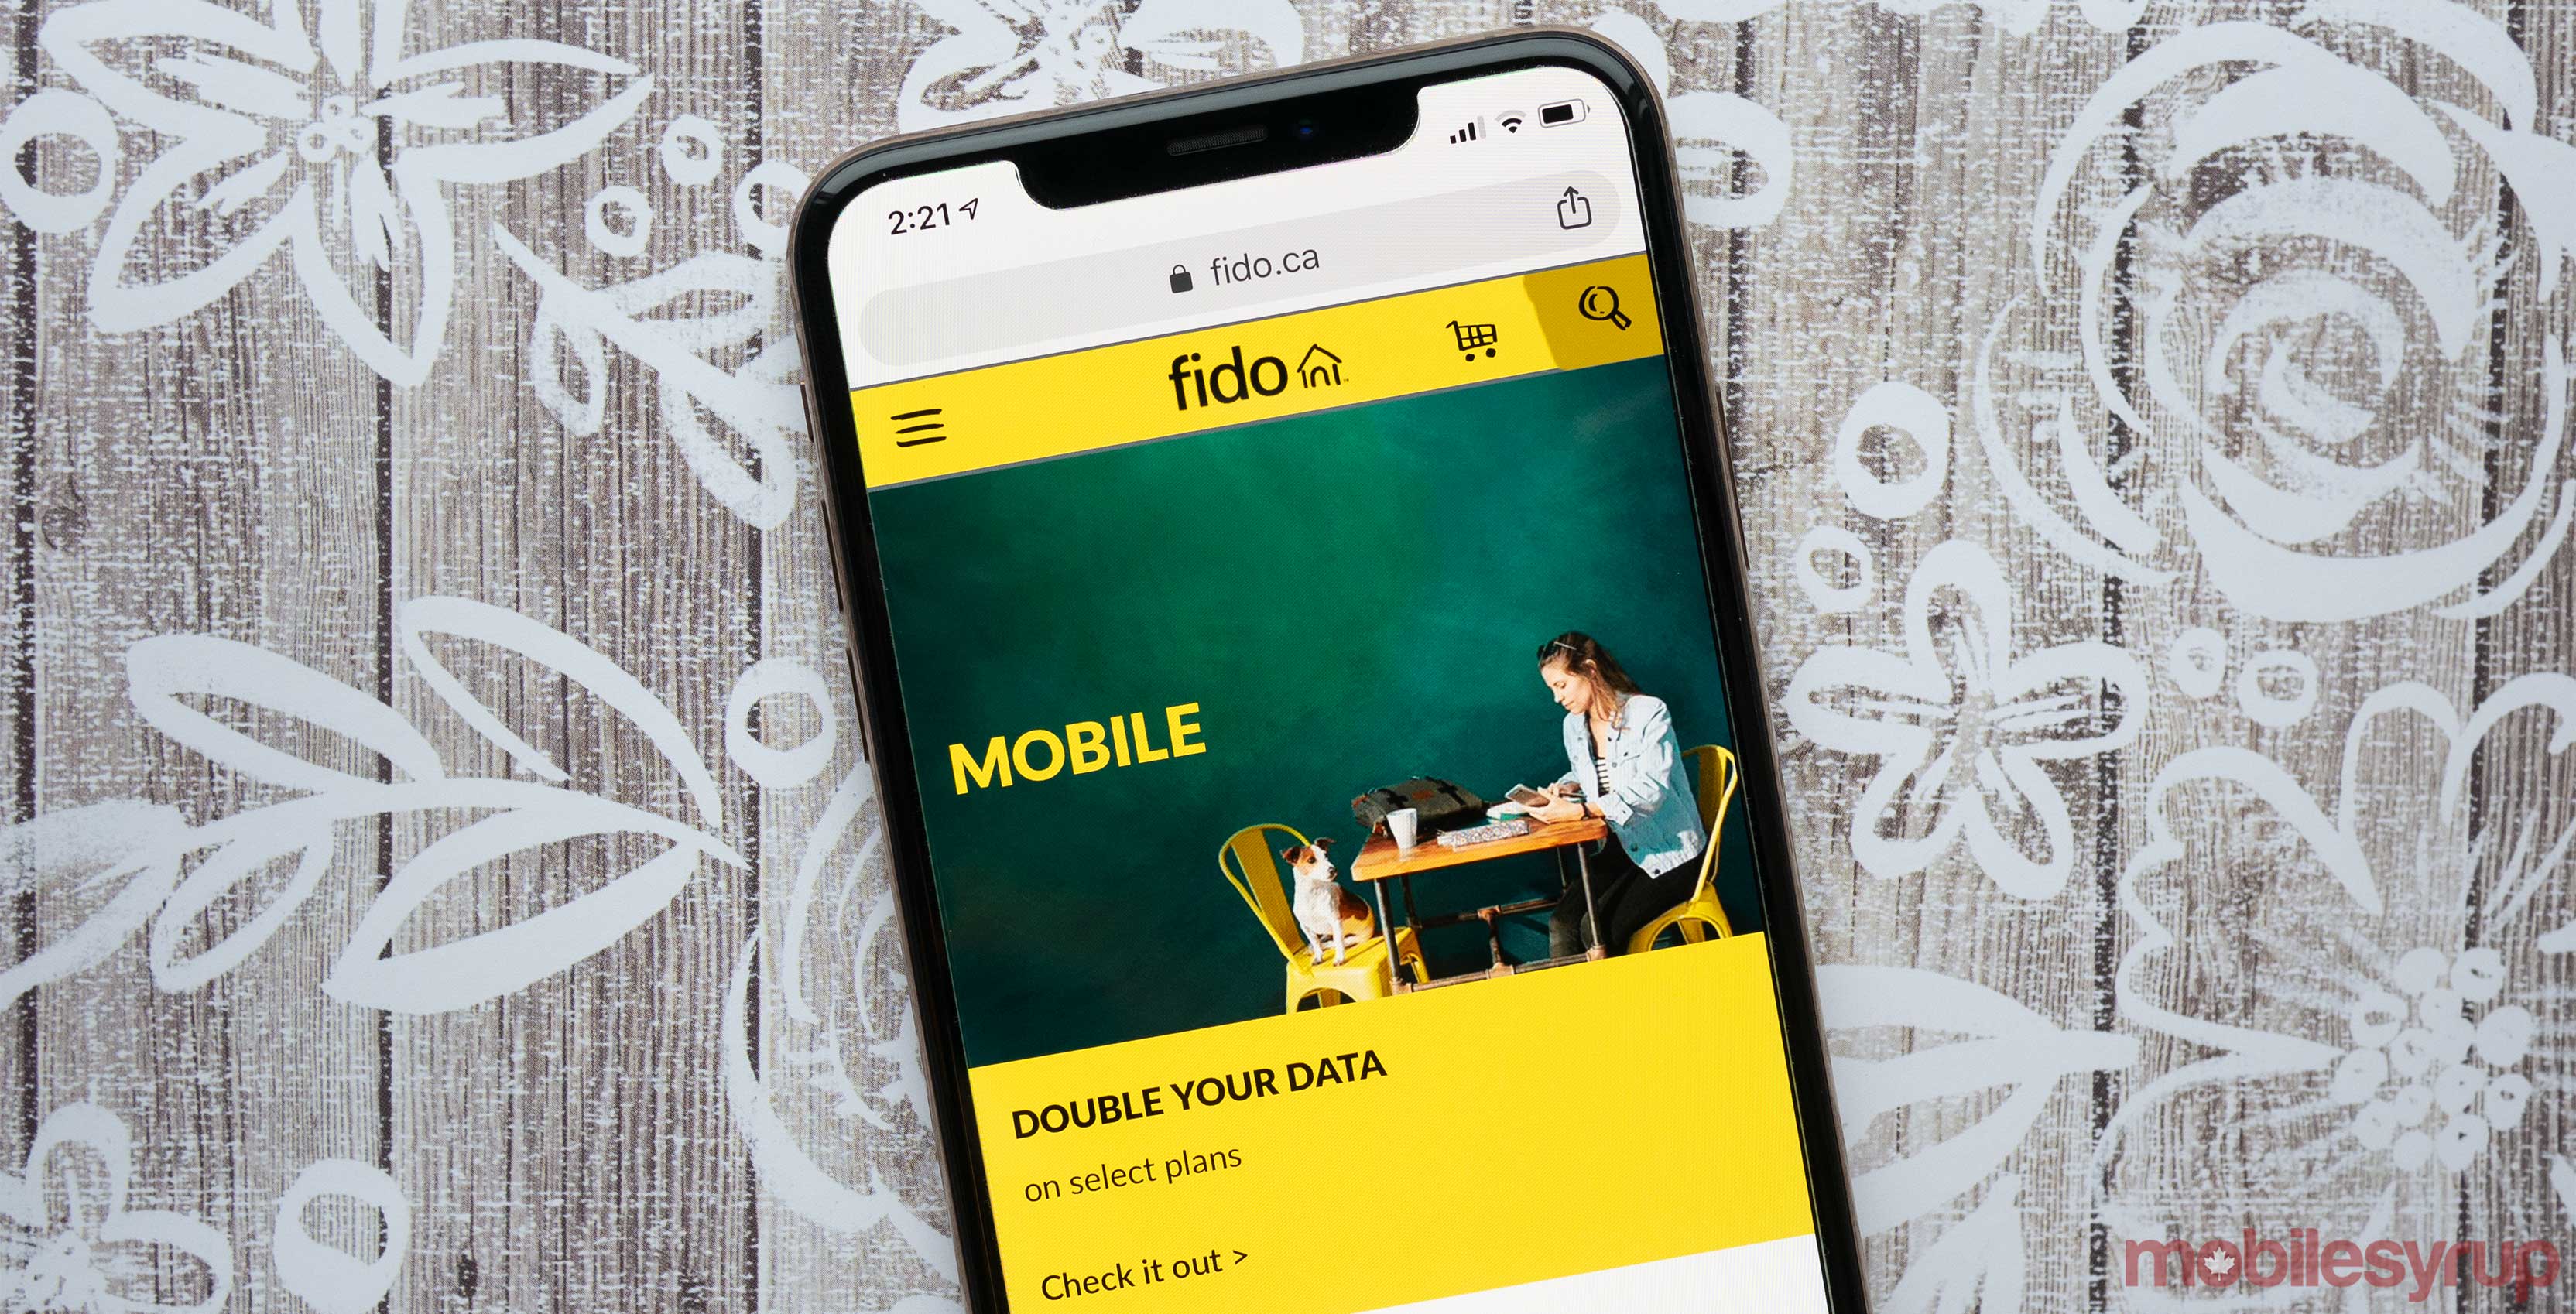 Fido to charge a $10 fee when you call 